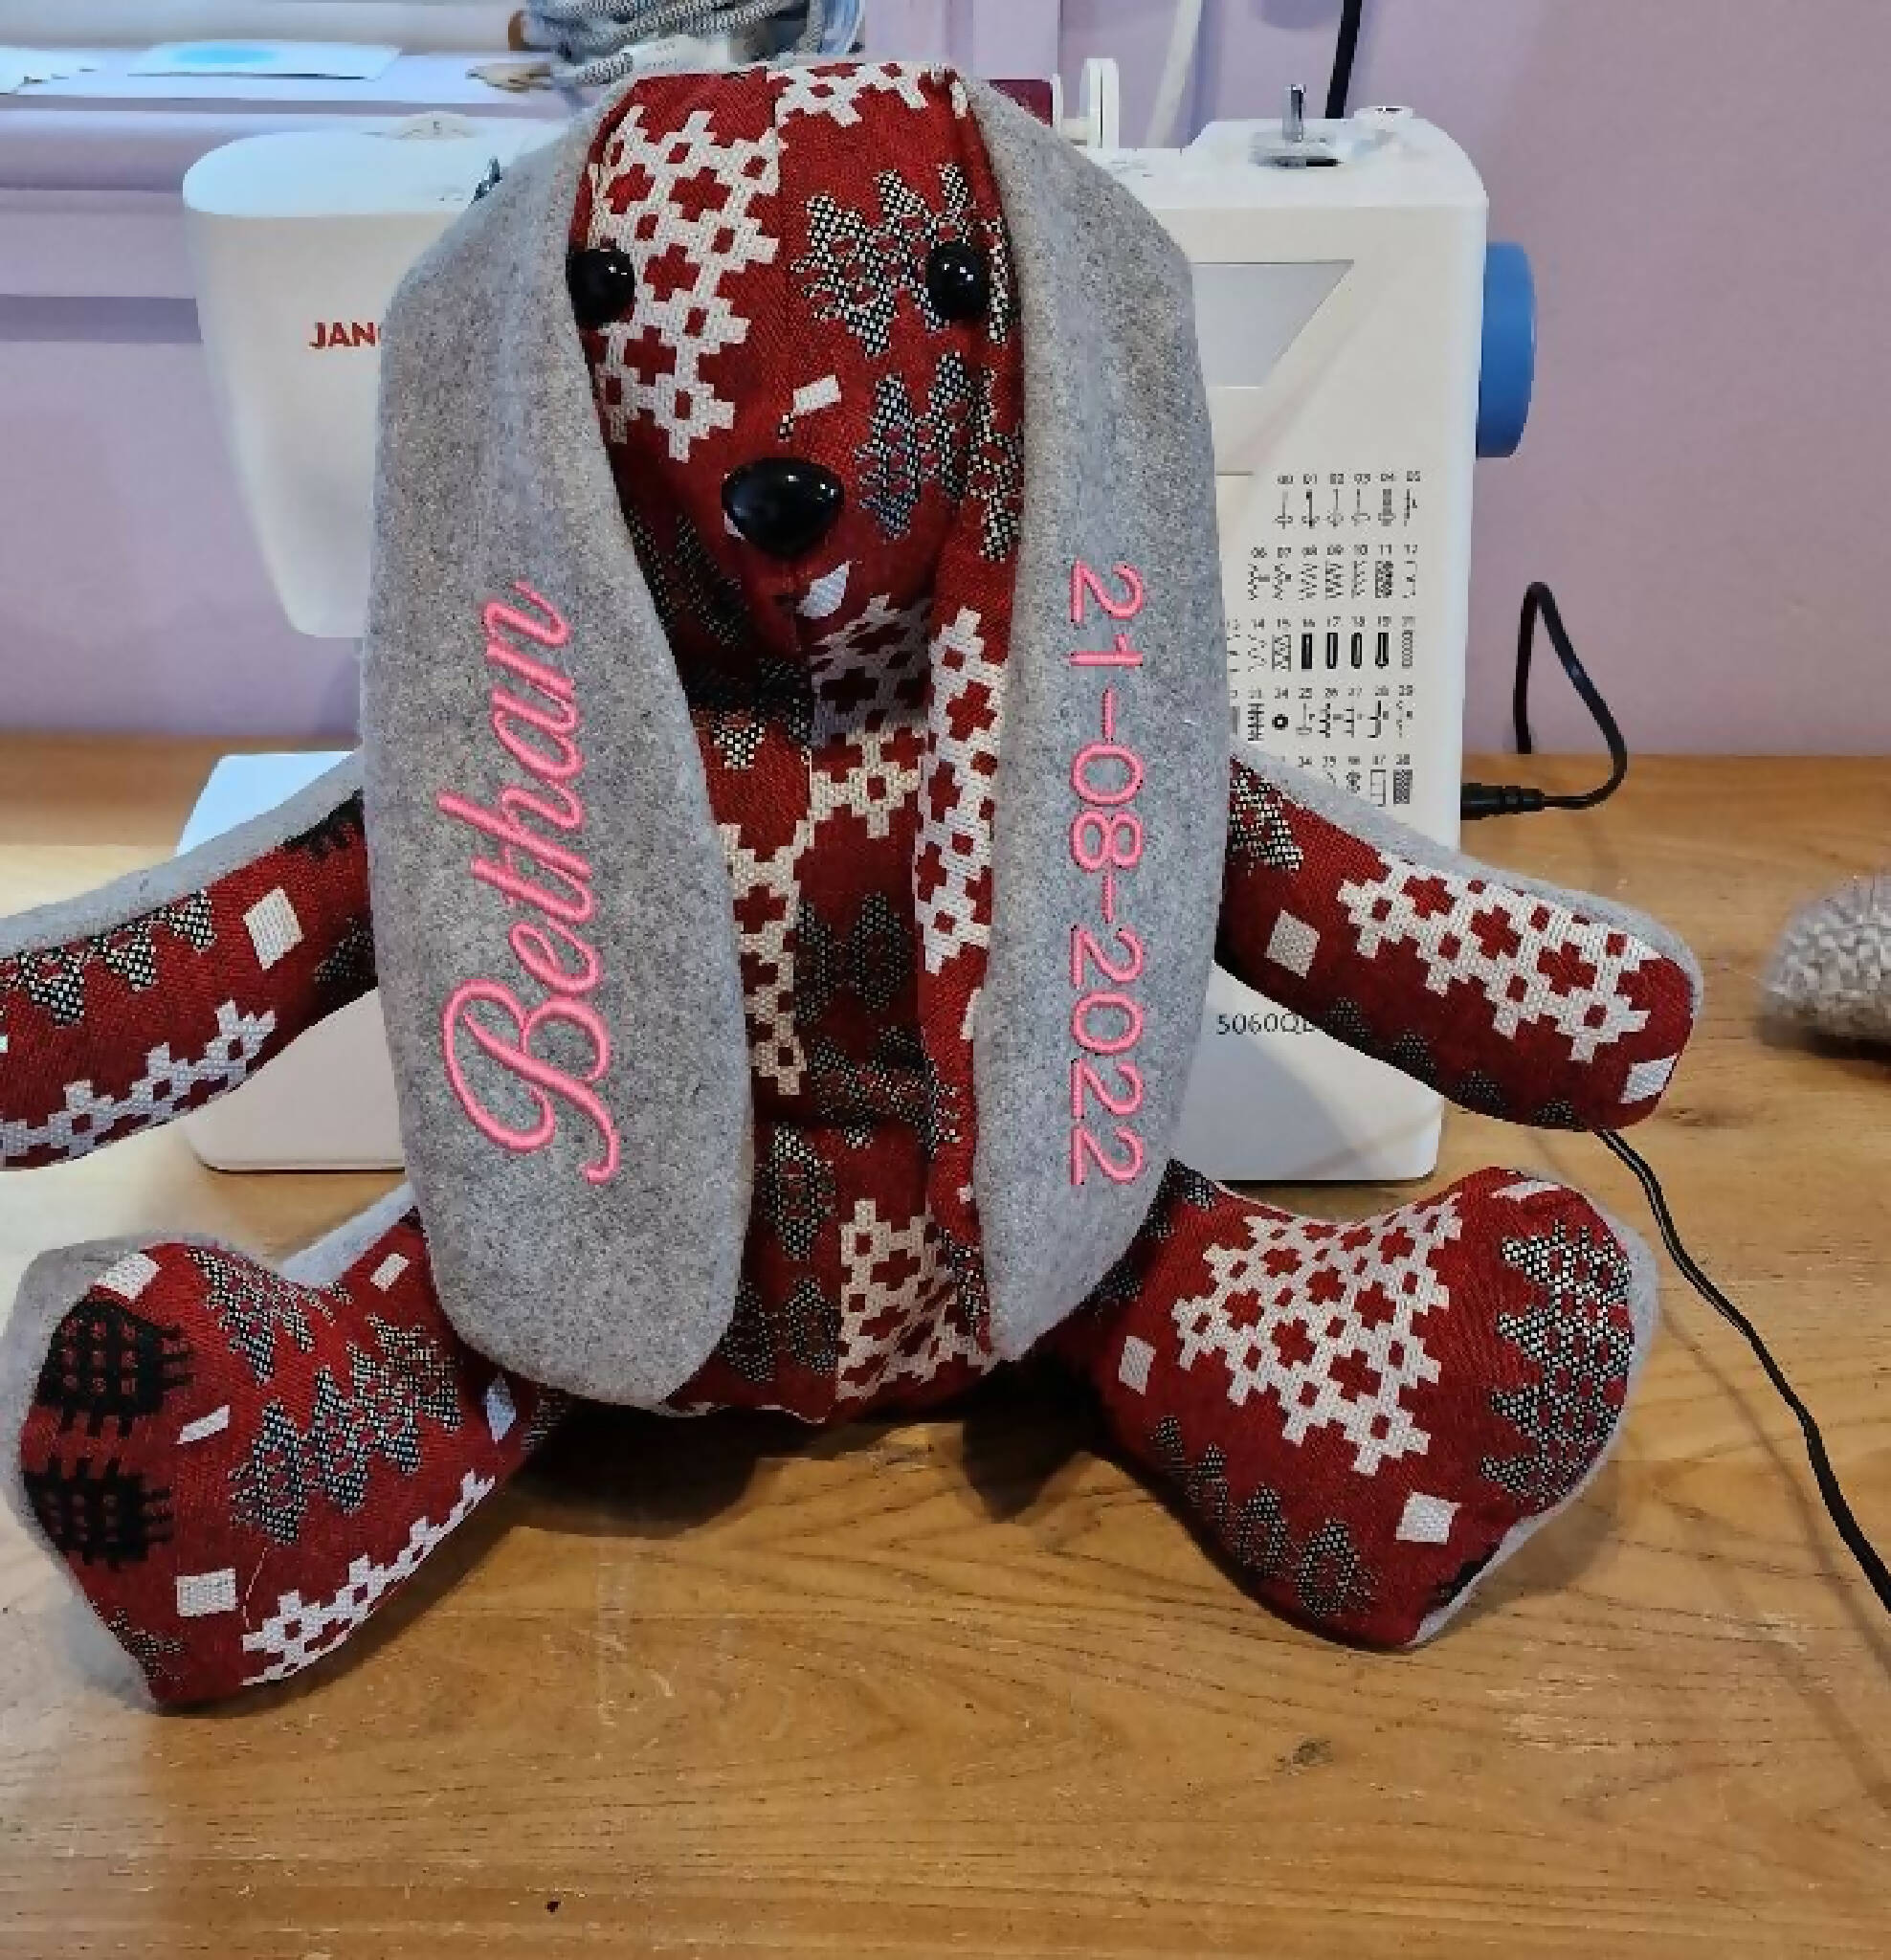 Handmade Bunny from Welsh Tapestry woven fabric with option of embroidered name added to ear see description